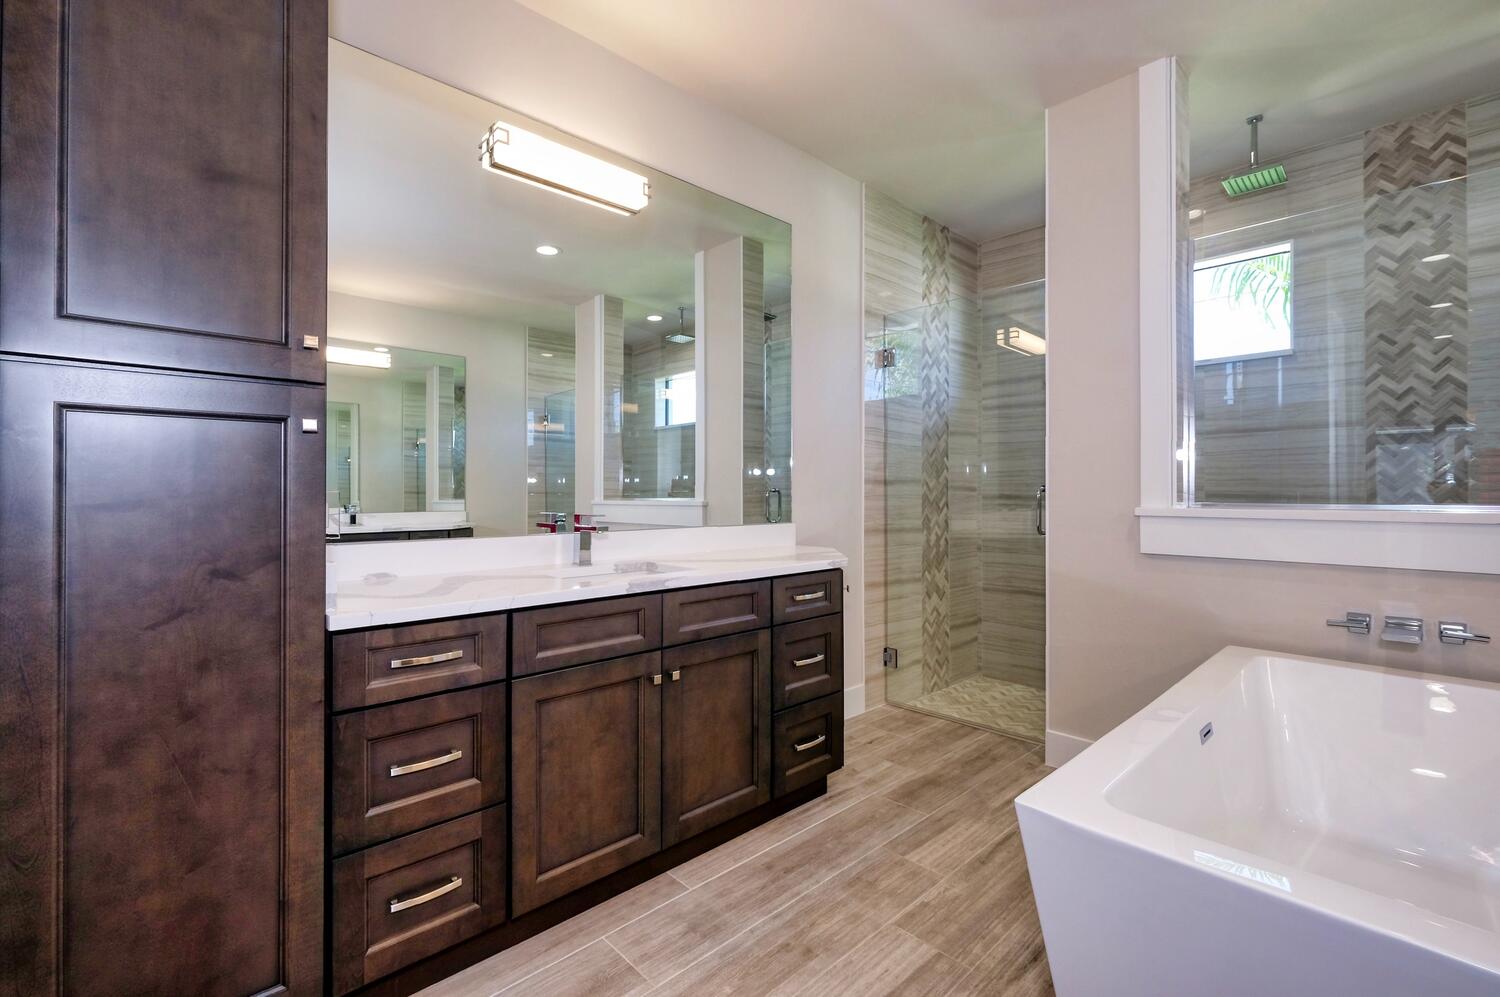 Picture of the cabinetry and vanity of the main bathroom of the model home Serenity